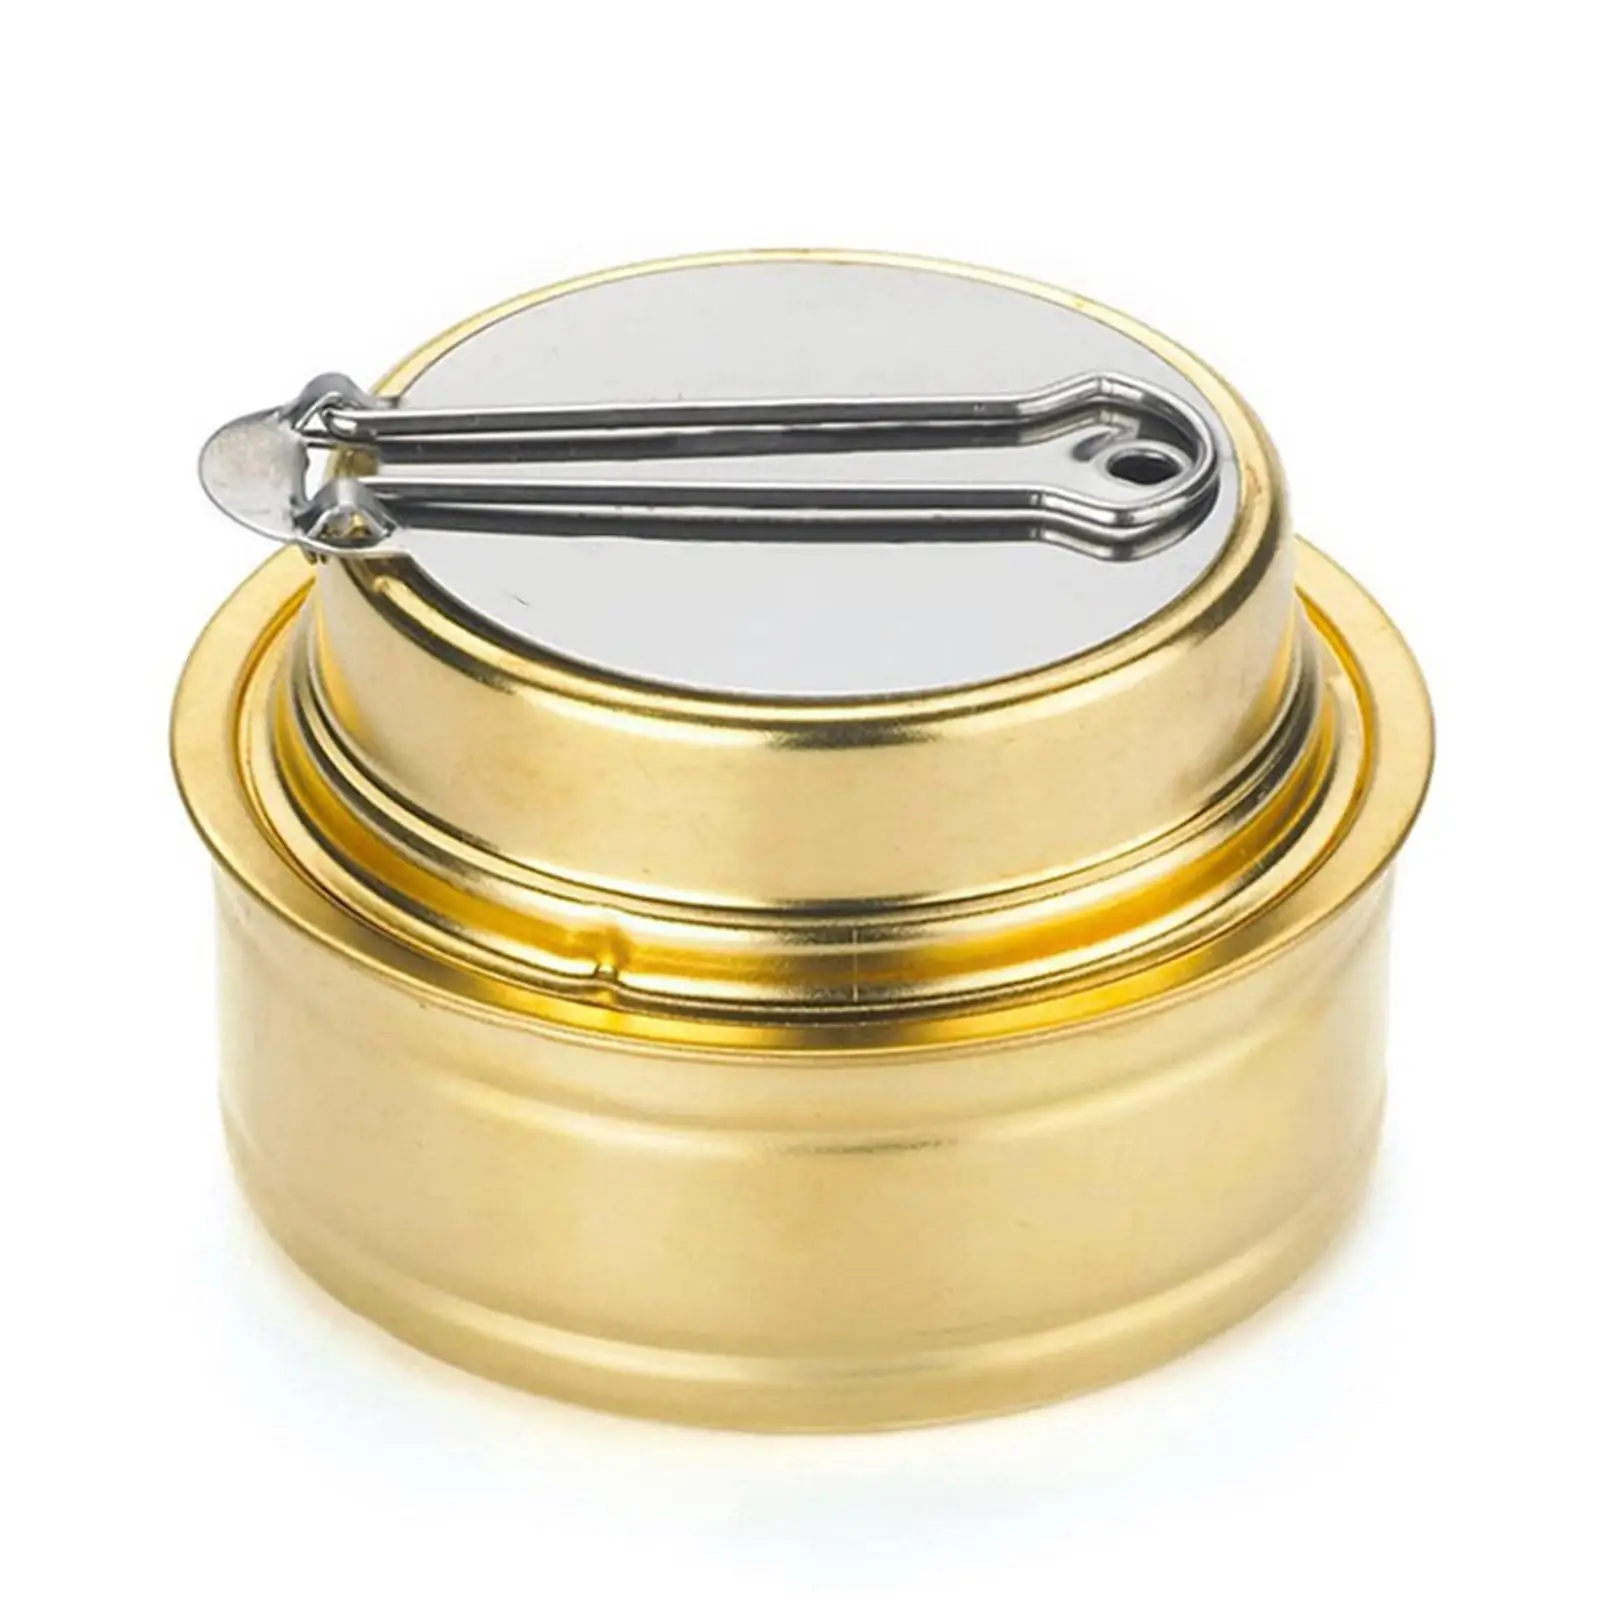 

Portable Mini Alcohol Stove Burner Outdoor Ultralight Outdoor Cooking Tourist Camping Stove Backpacking Brass Camping Burne I8I0